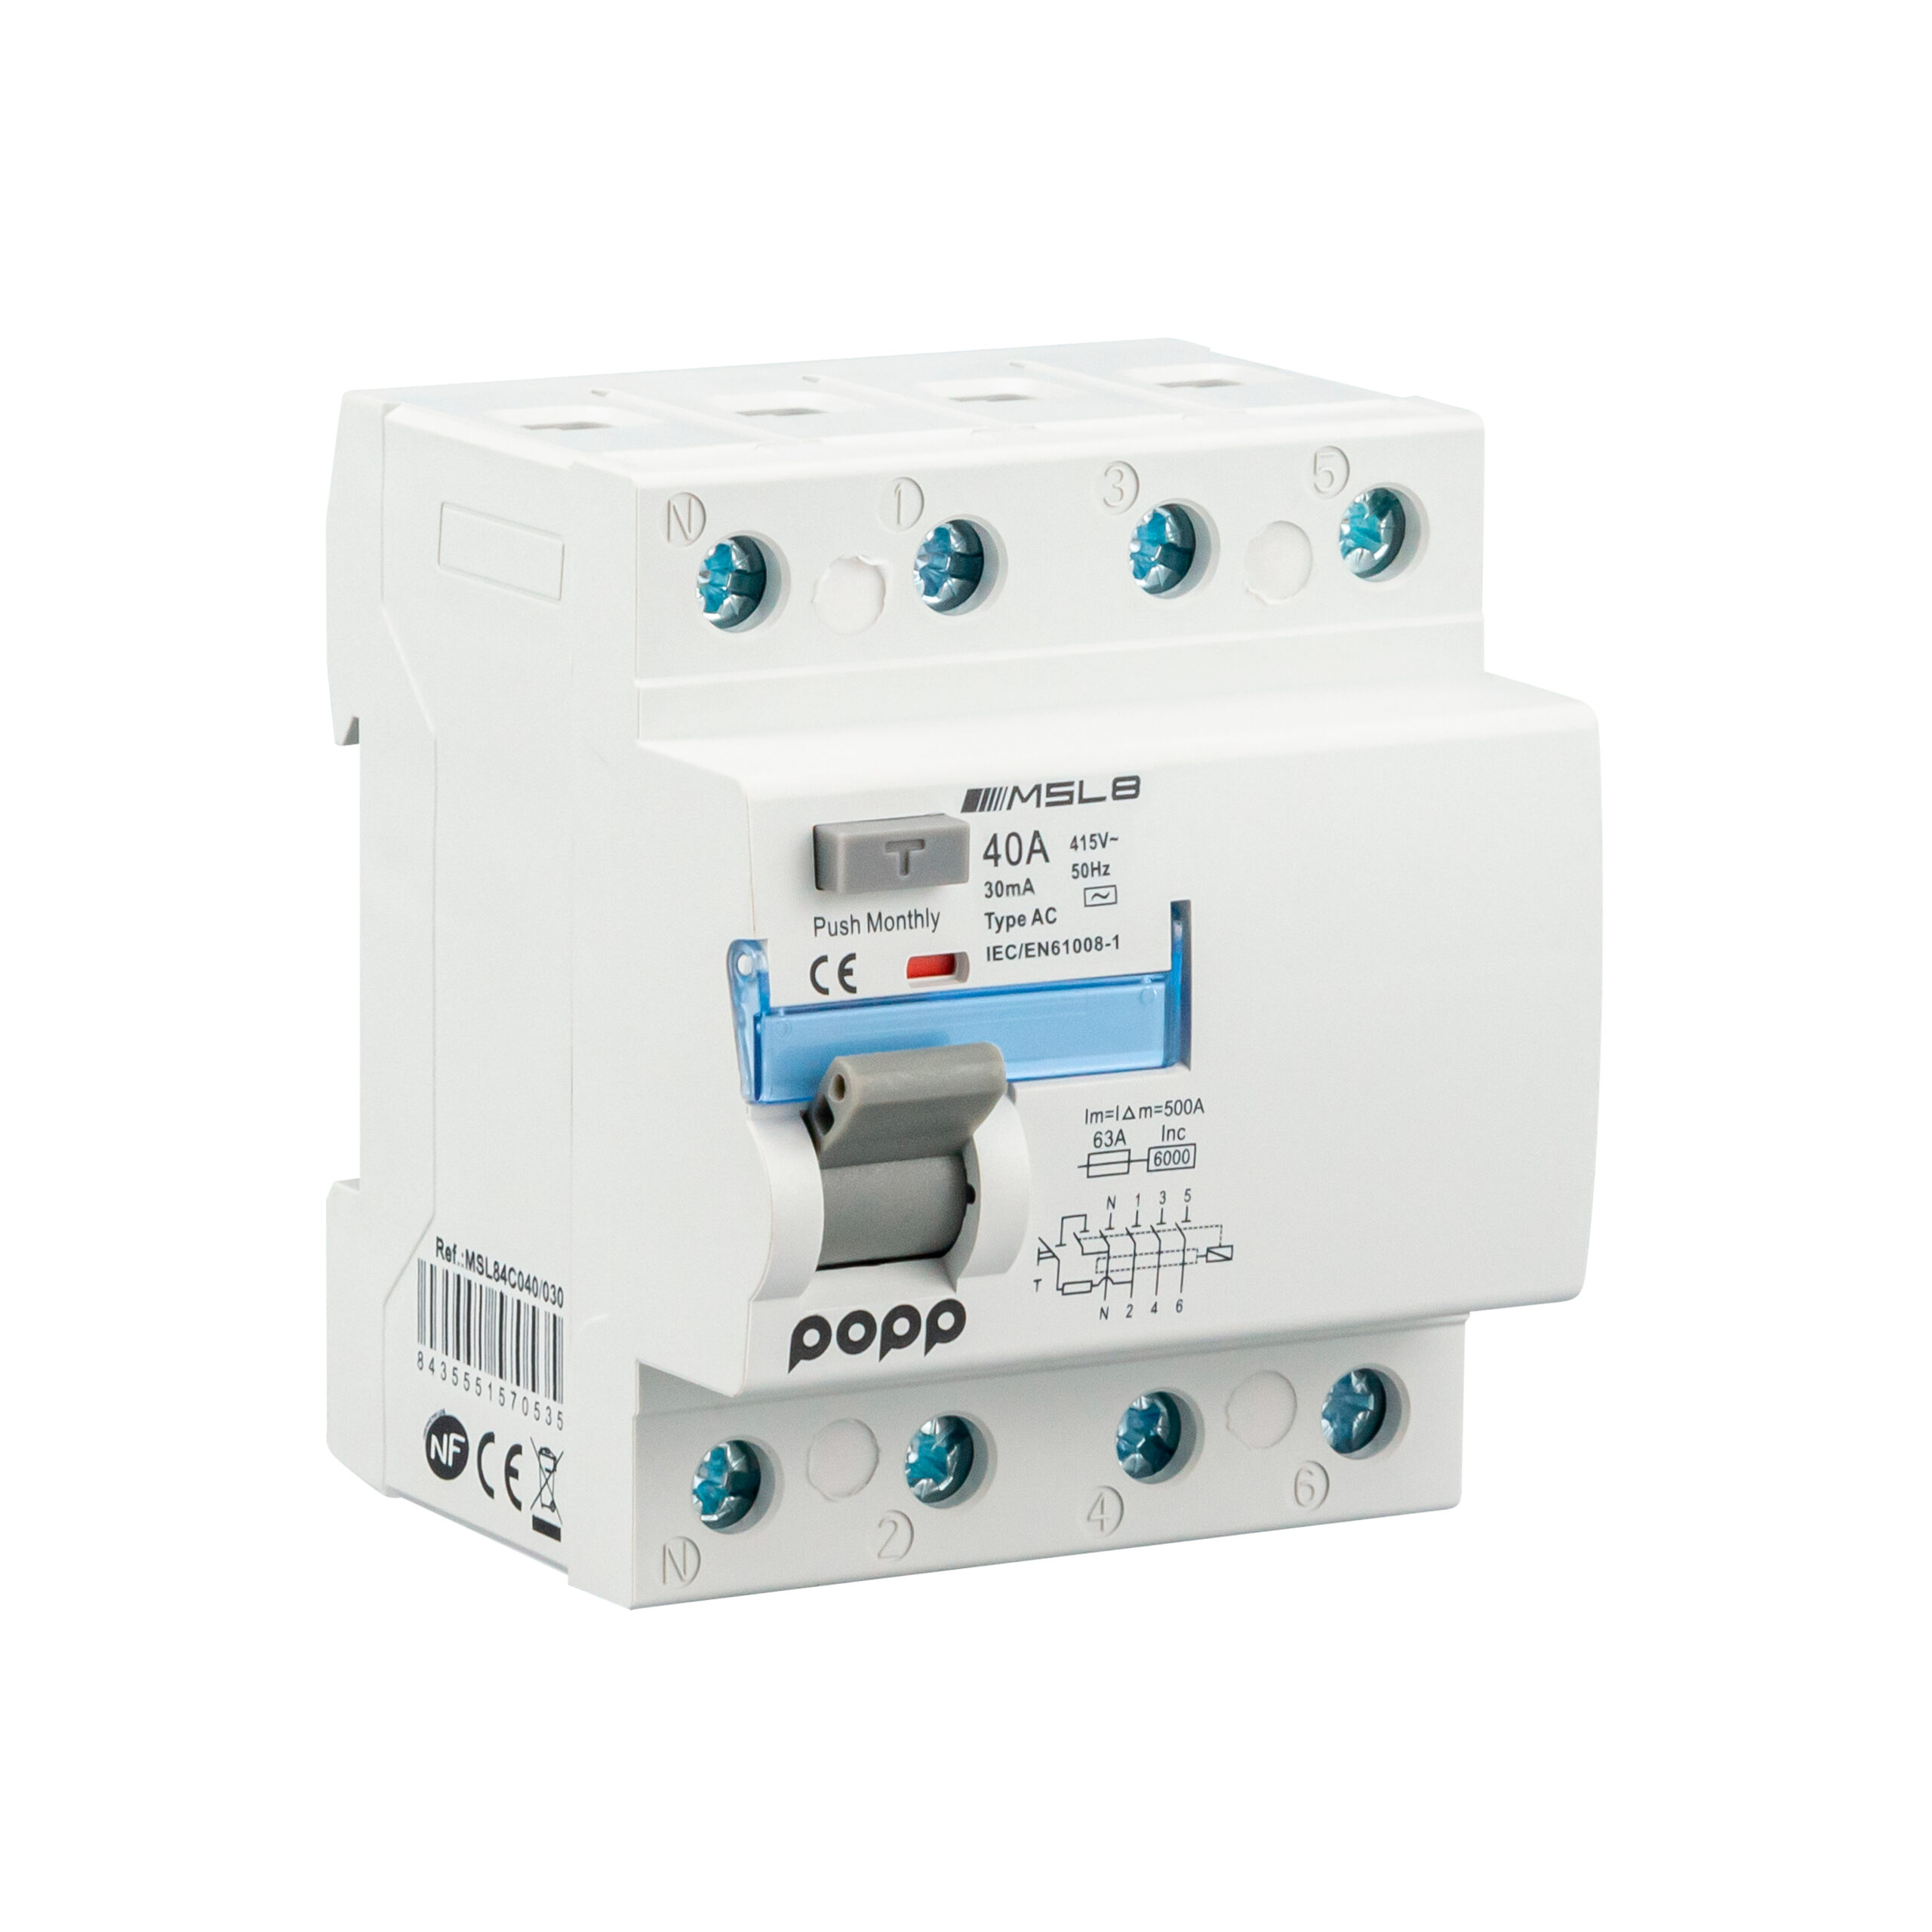 Interruptor 3P+N 40A 30mA diferencial serie MSL8 gama industrial